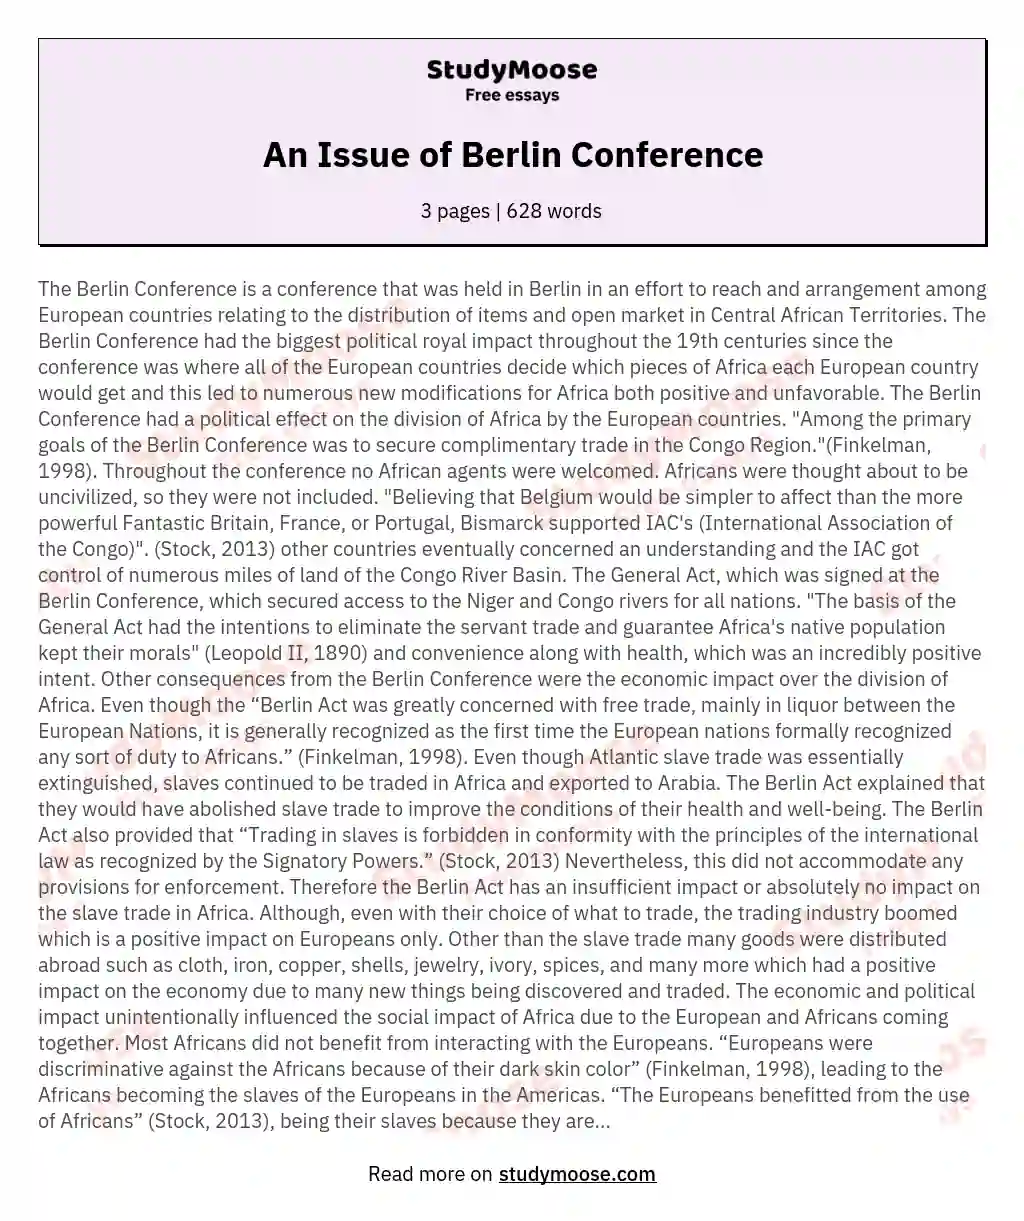 An Issue of Berlin Conference